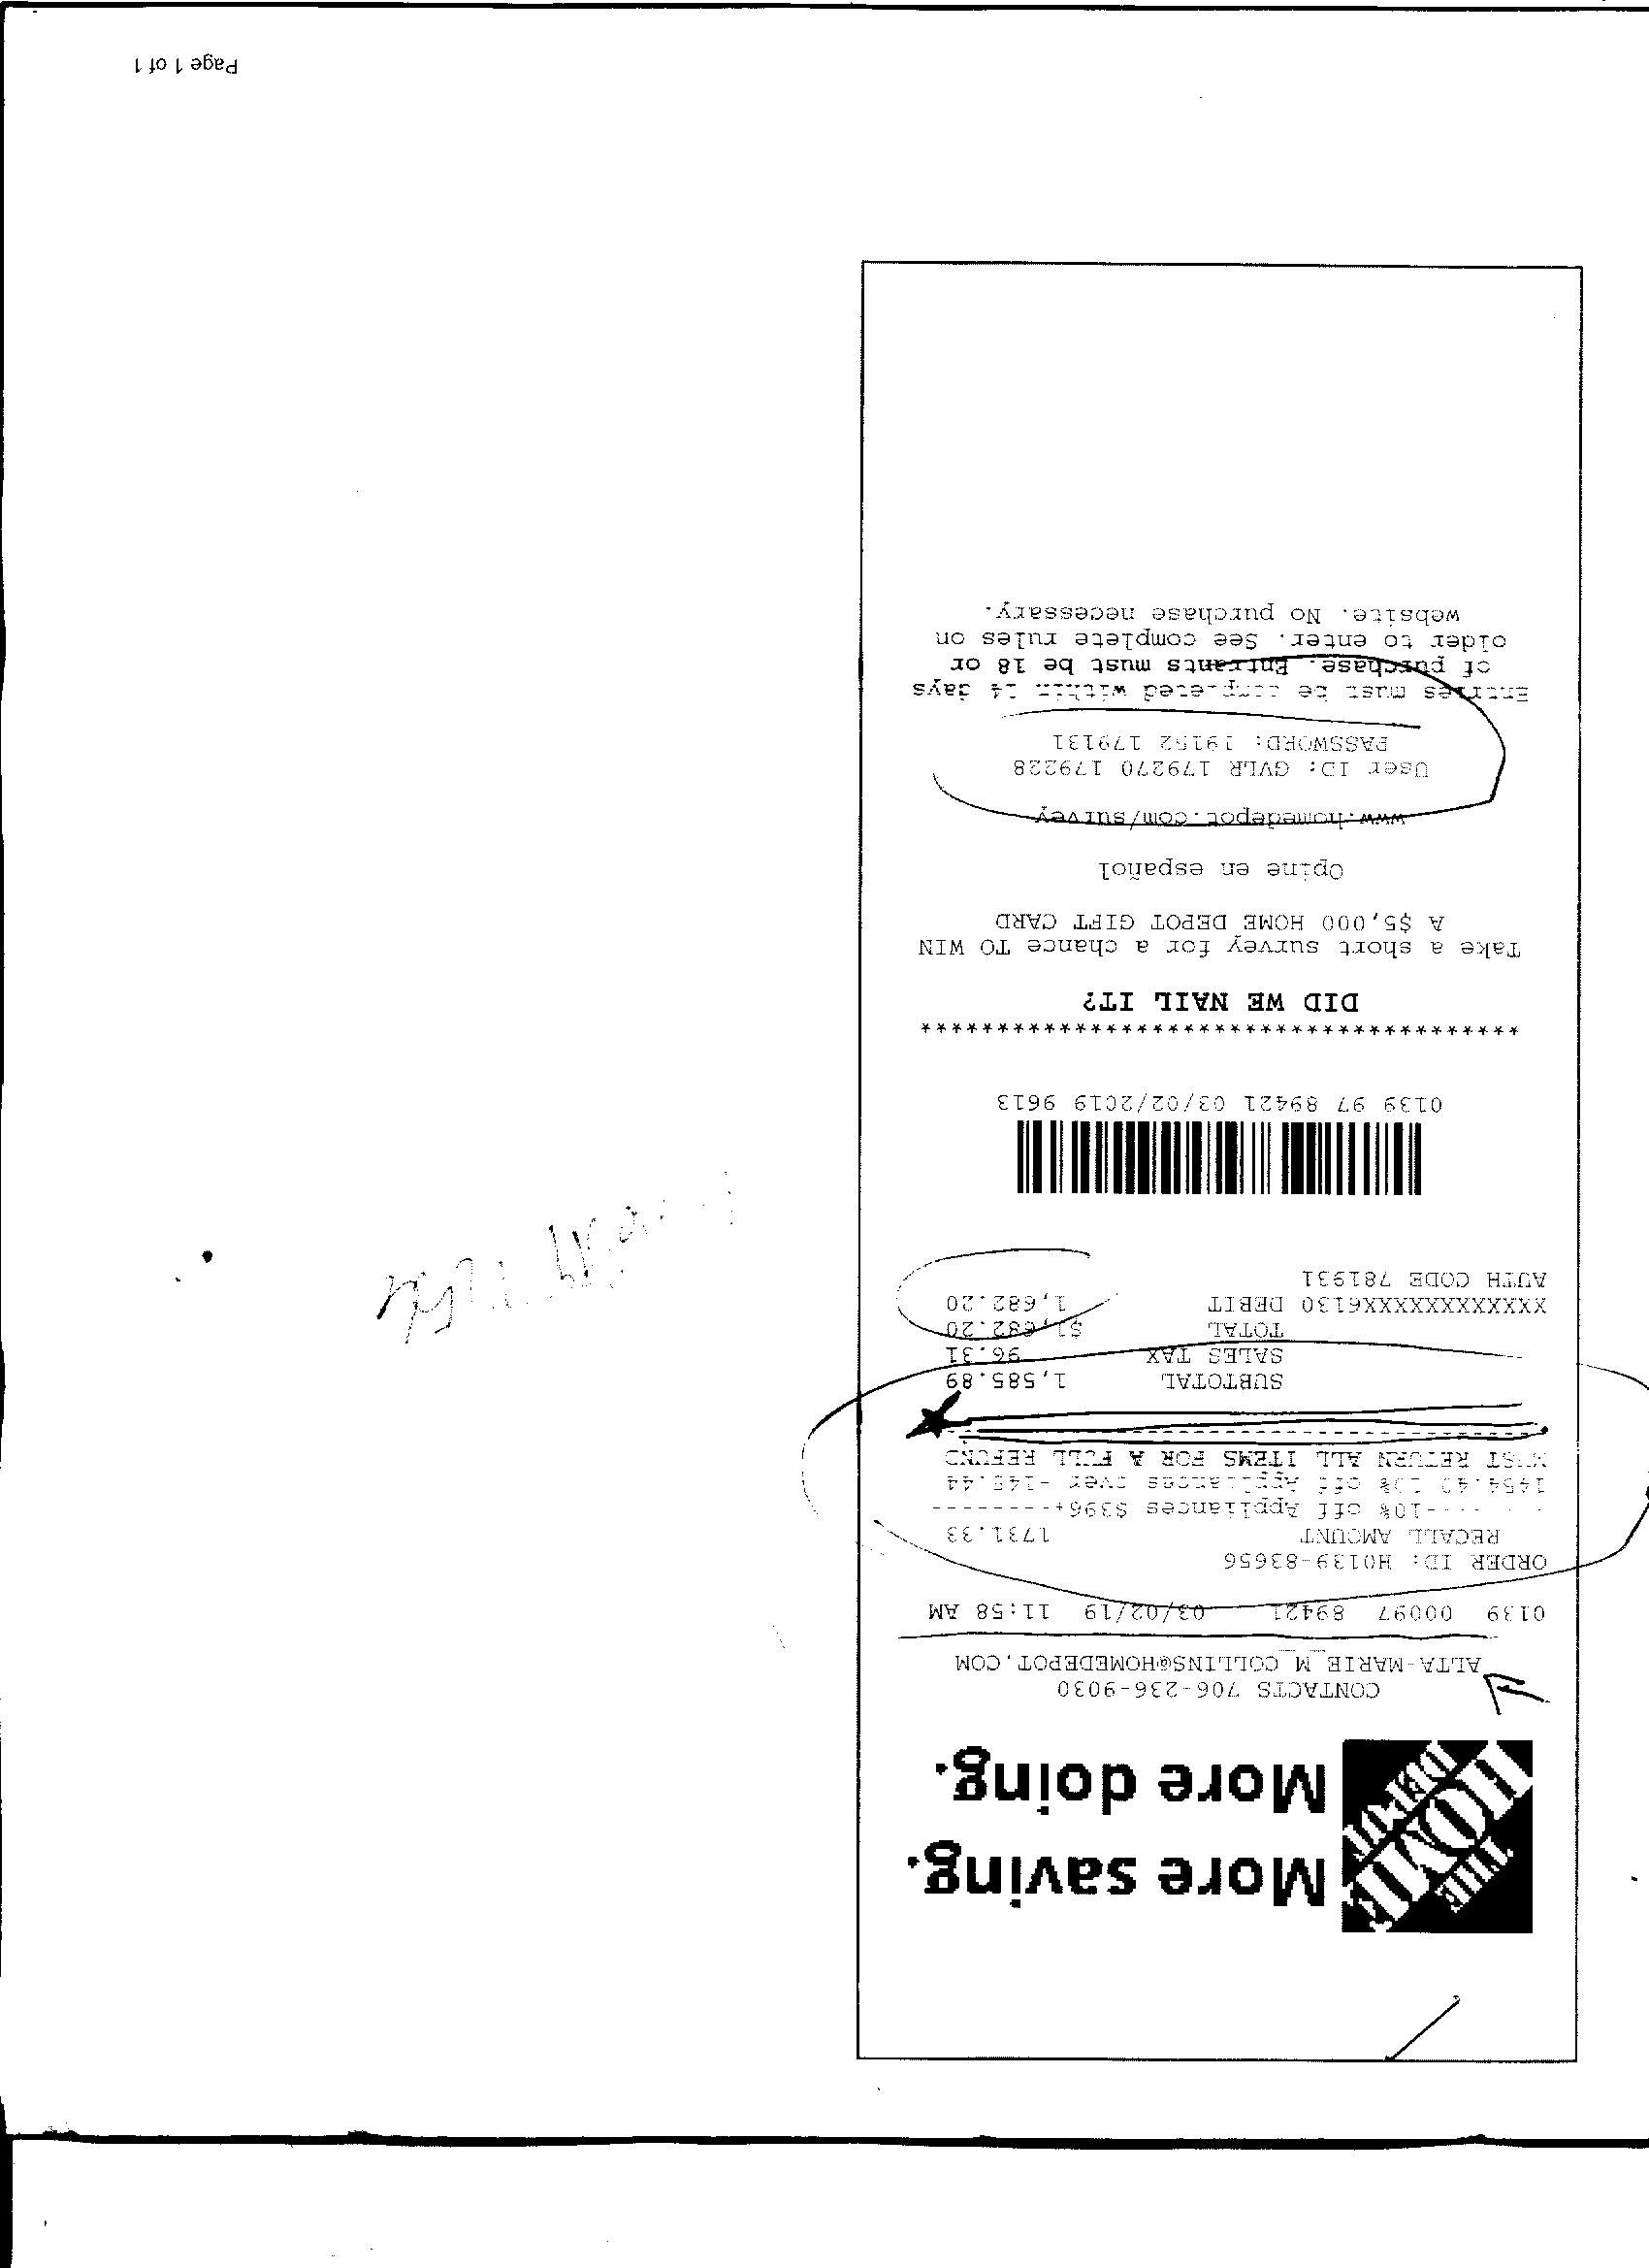 Home Depot Corporate Complaints - Number 25  HissingKitty.com In Home Depot Receipt Template